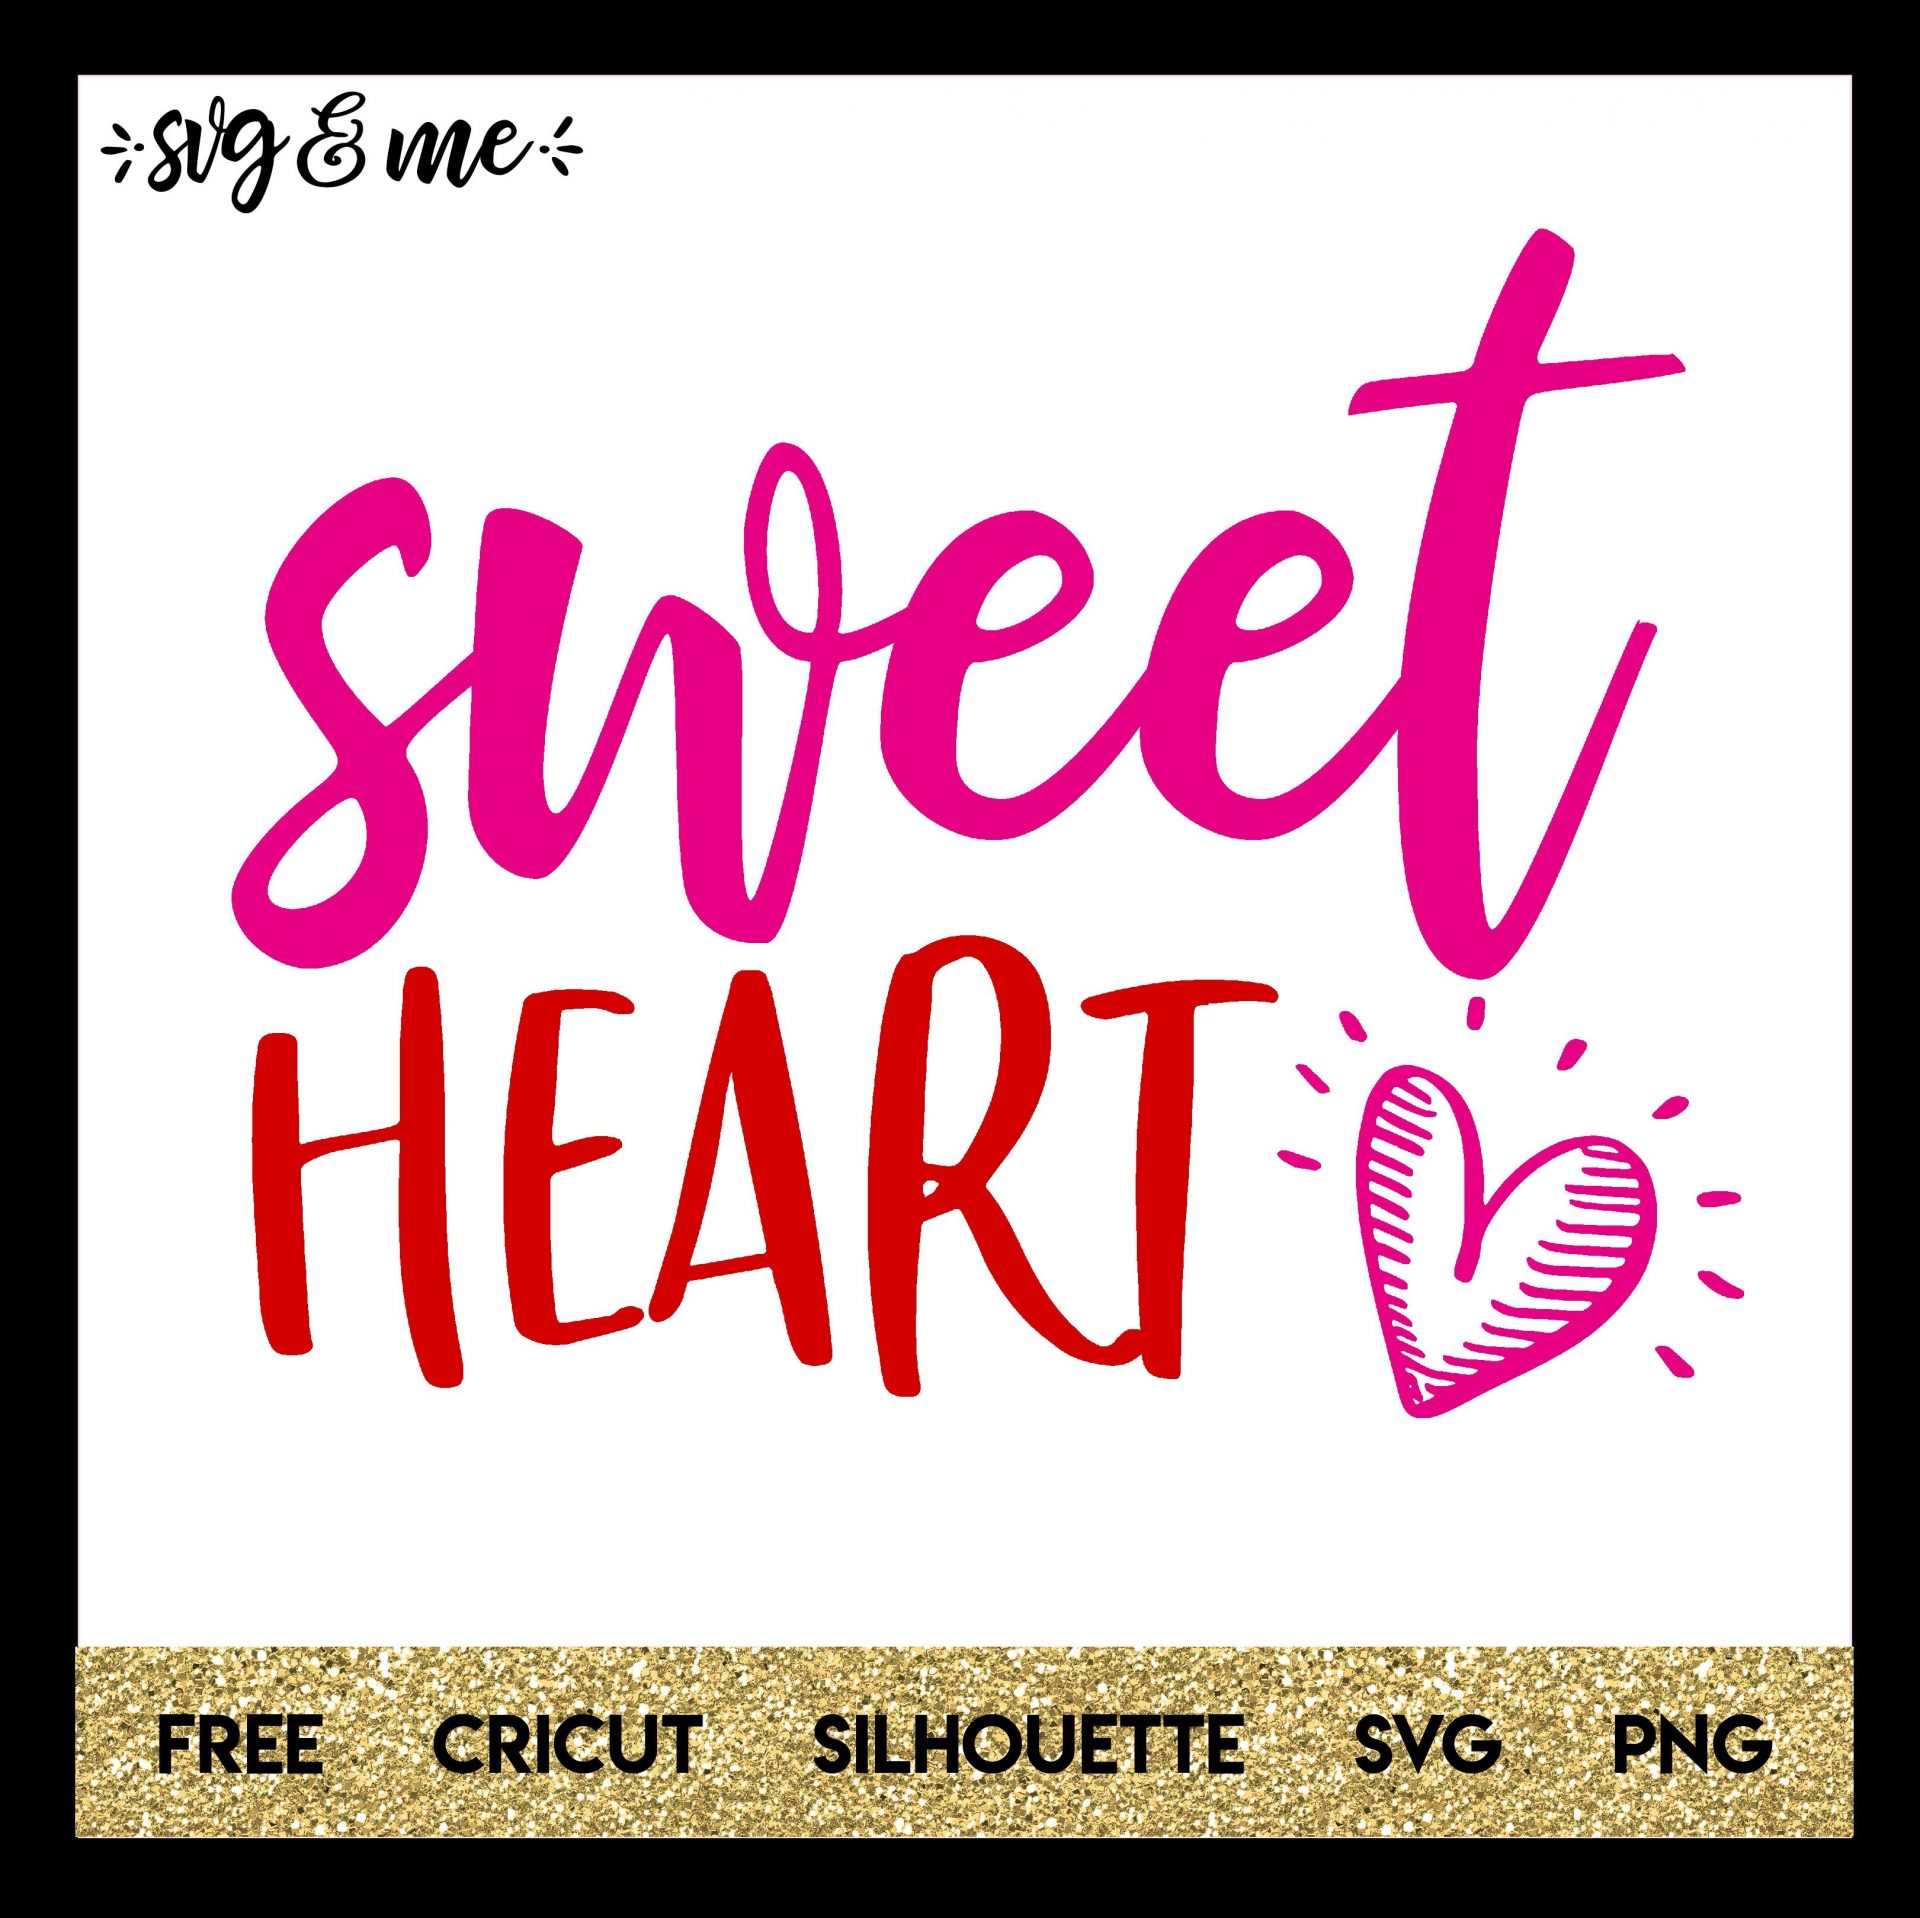 FREE SVG CUT FILE for Cricut, Silhouette and more - Sweetheart Valentine's Day